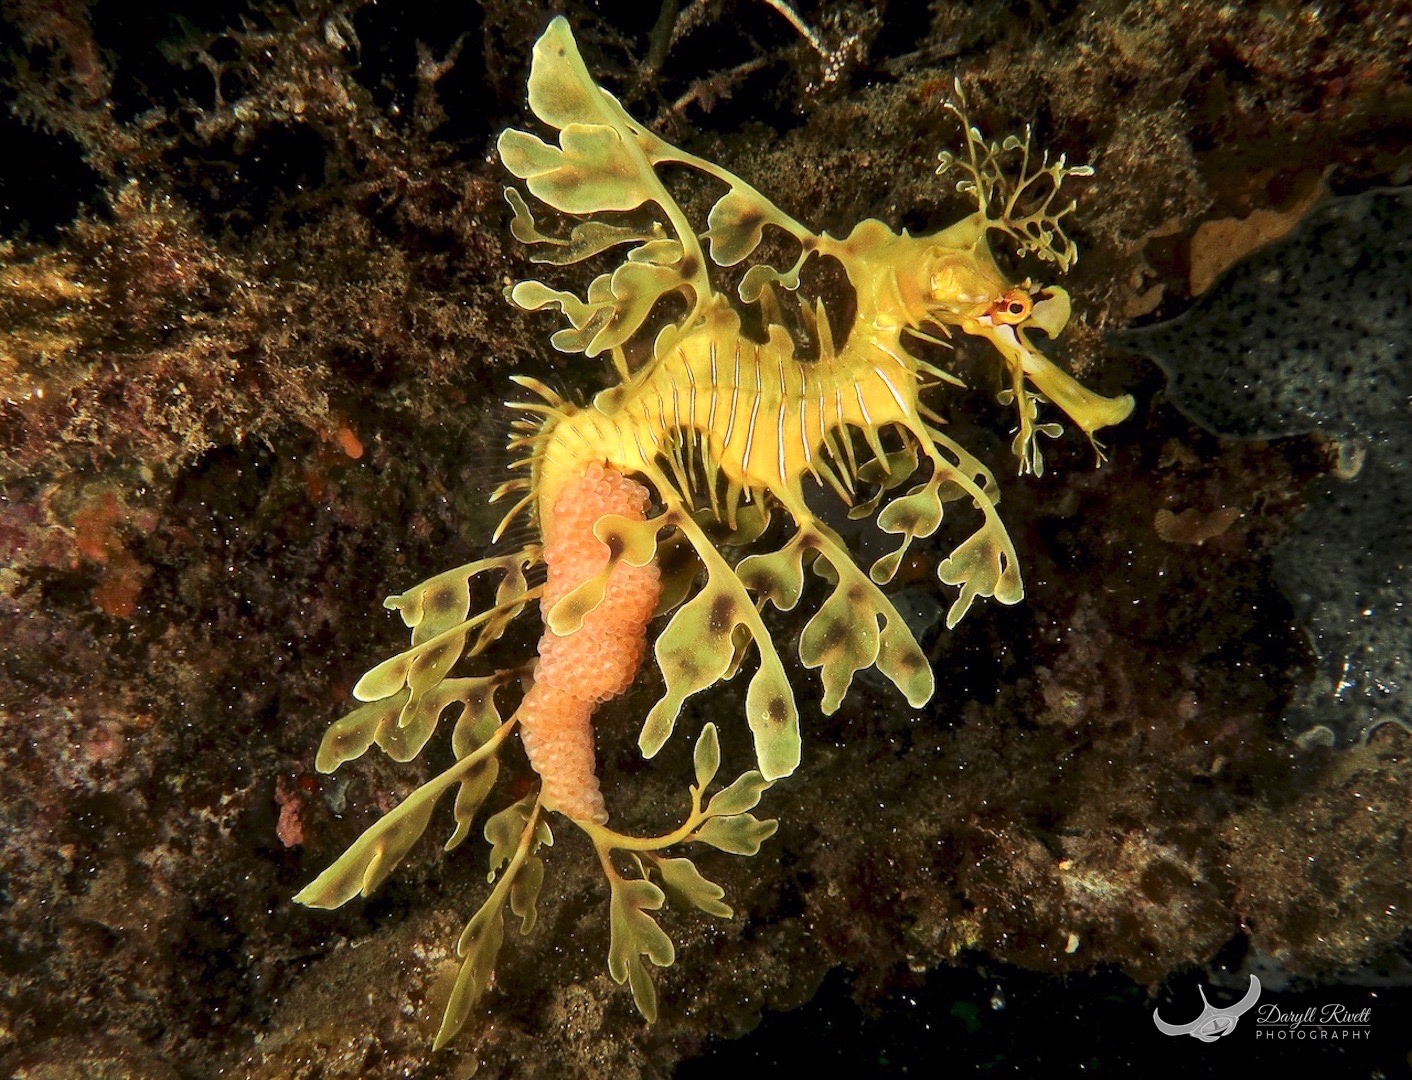 A pregant male Leafy Seadragon, carrying the pink egg mass on its tale until the eggs hatch.